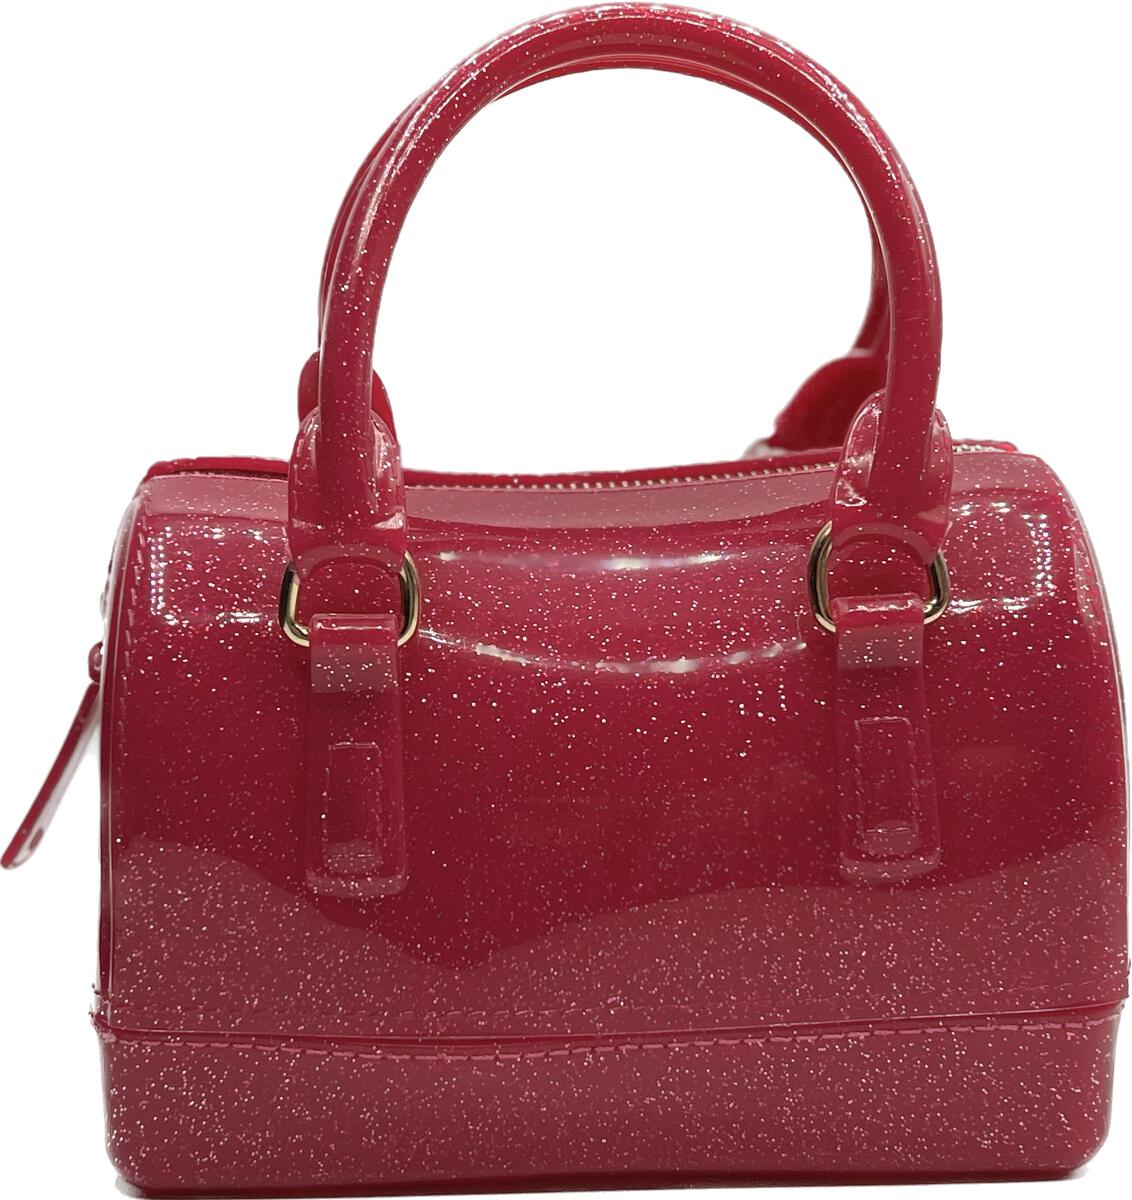 Carrying Kind Jelly Purse - Ruby